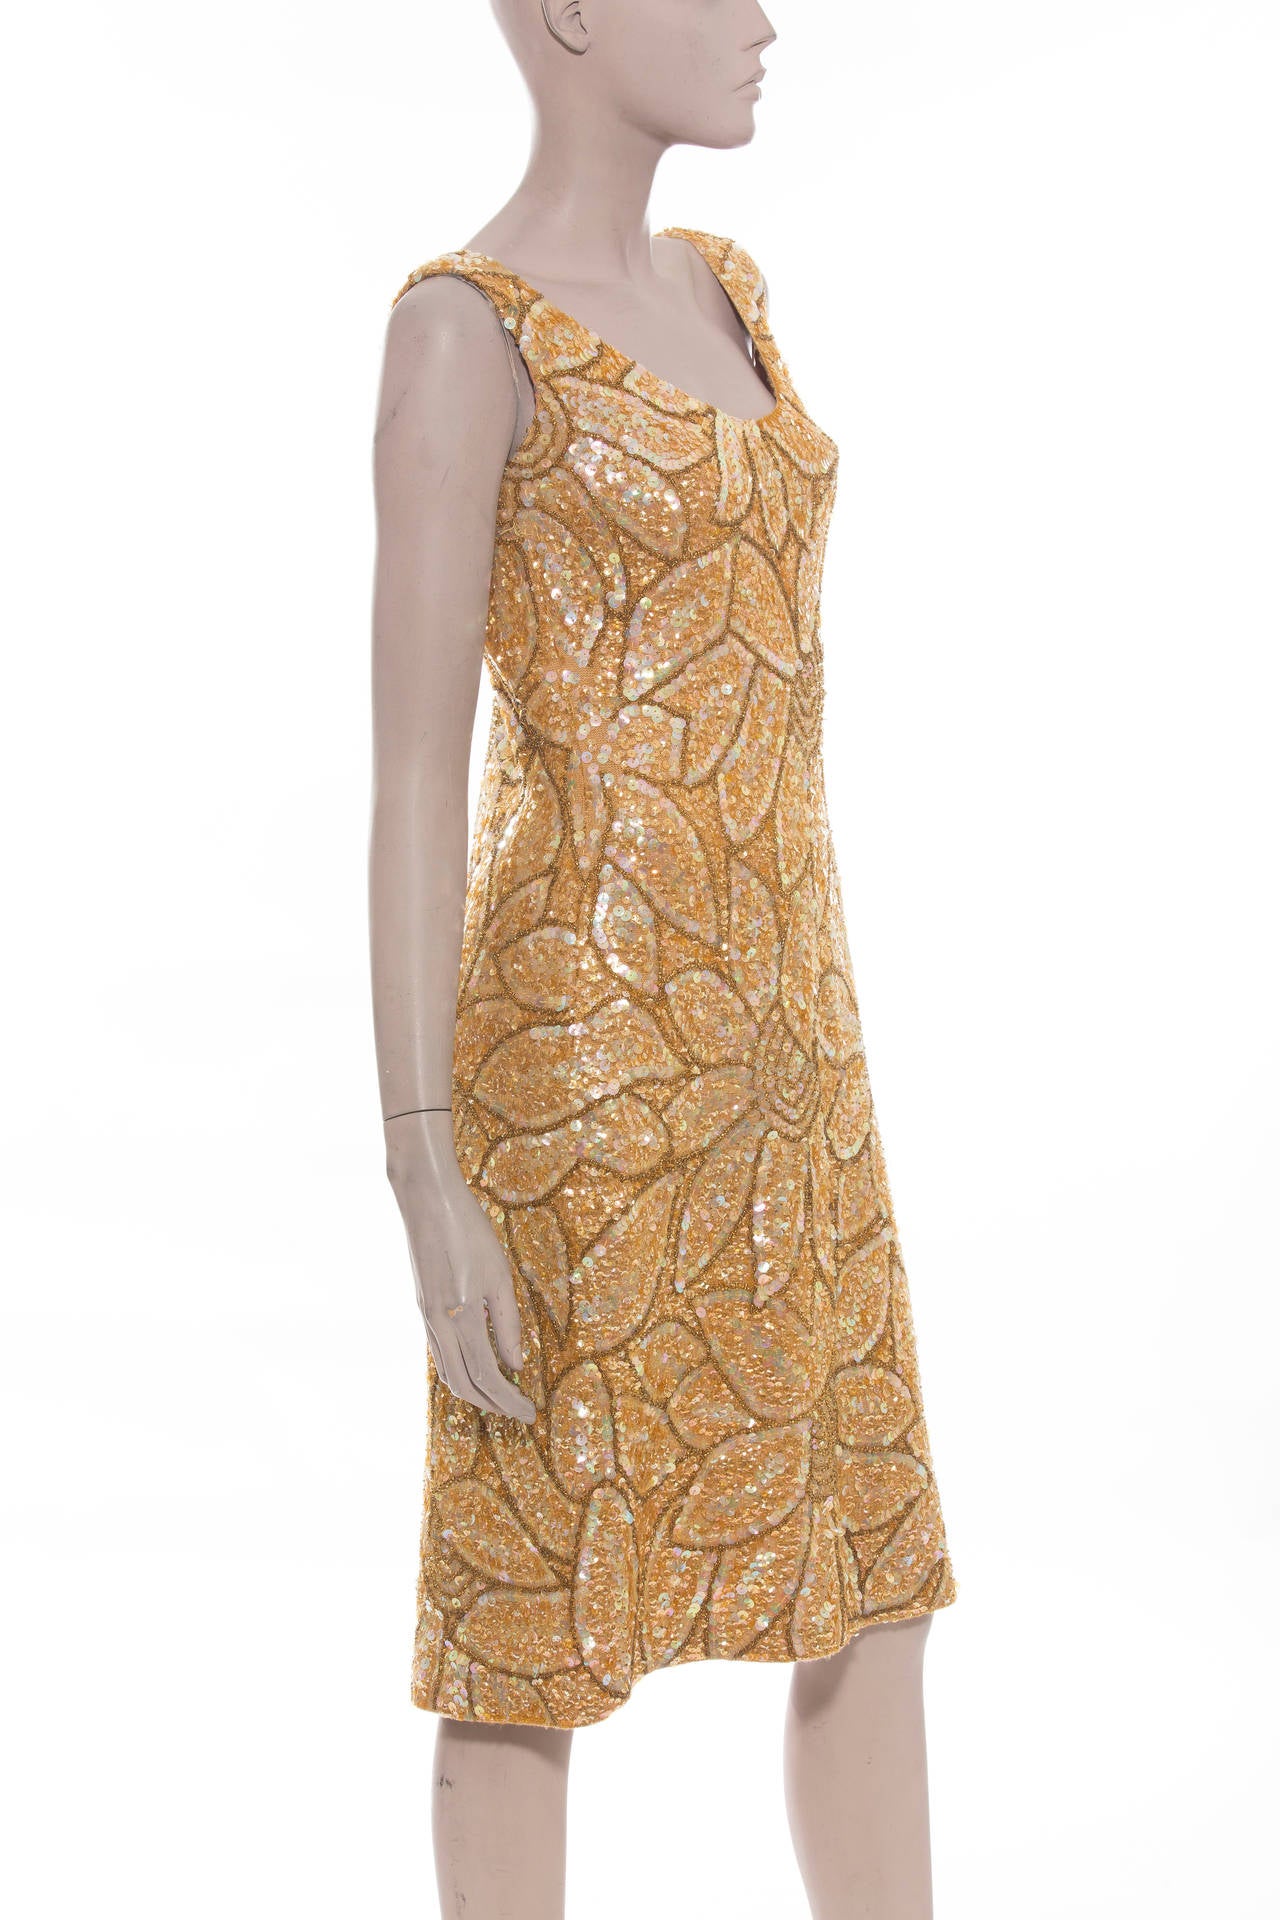 Women's Gene Shelly's Boutique International Knit Sequined Dress And Top, Circa 1960 For Sale